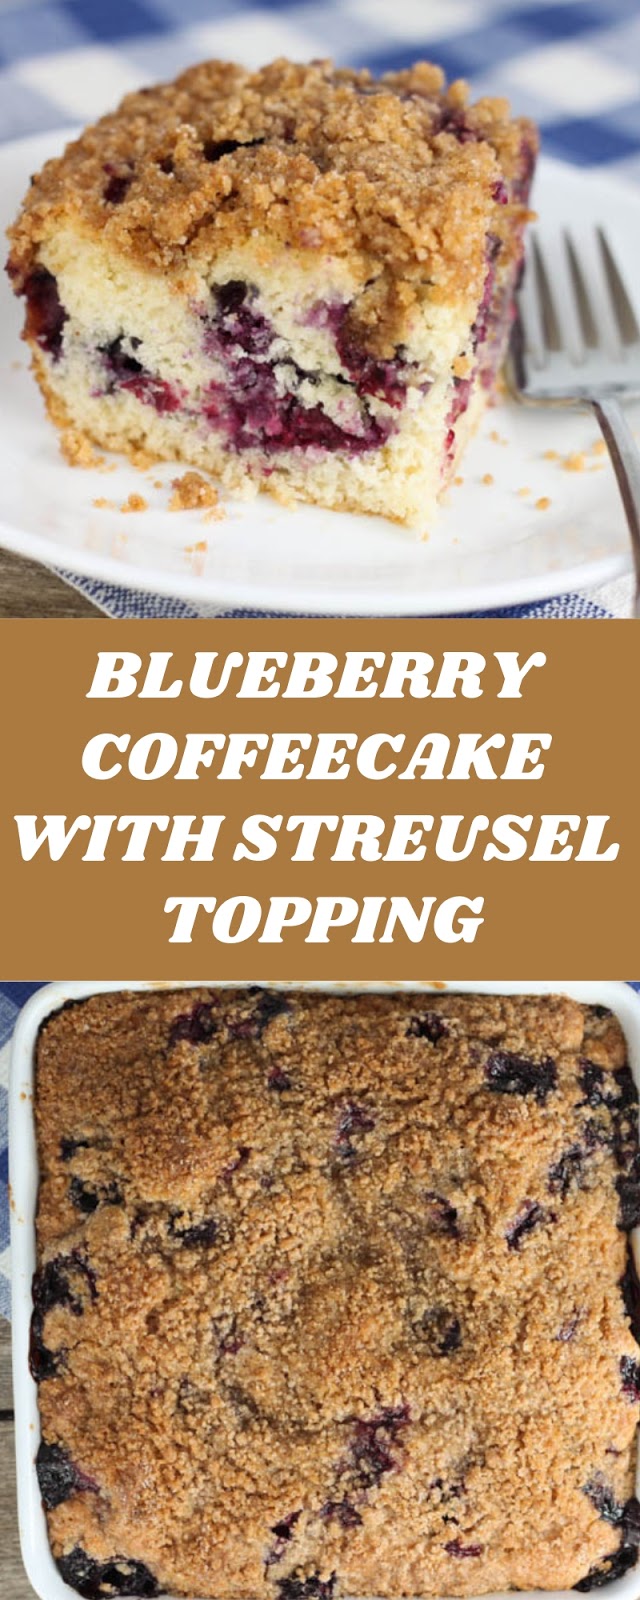 BLUEBERRY COFFEECAKE WITH STREUSEL TOPPING